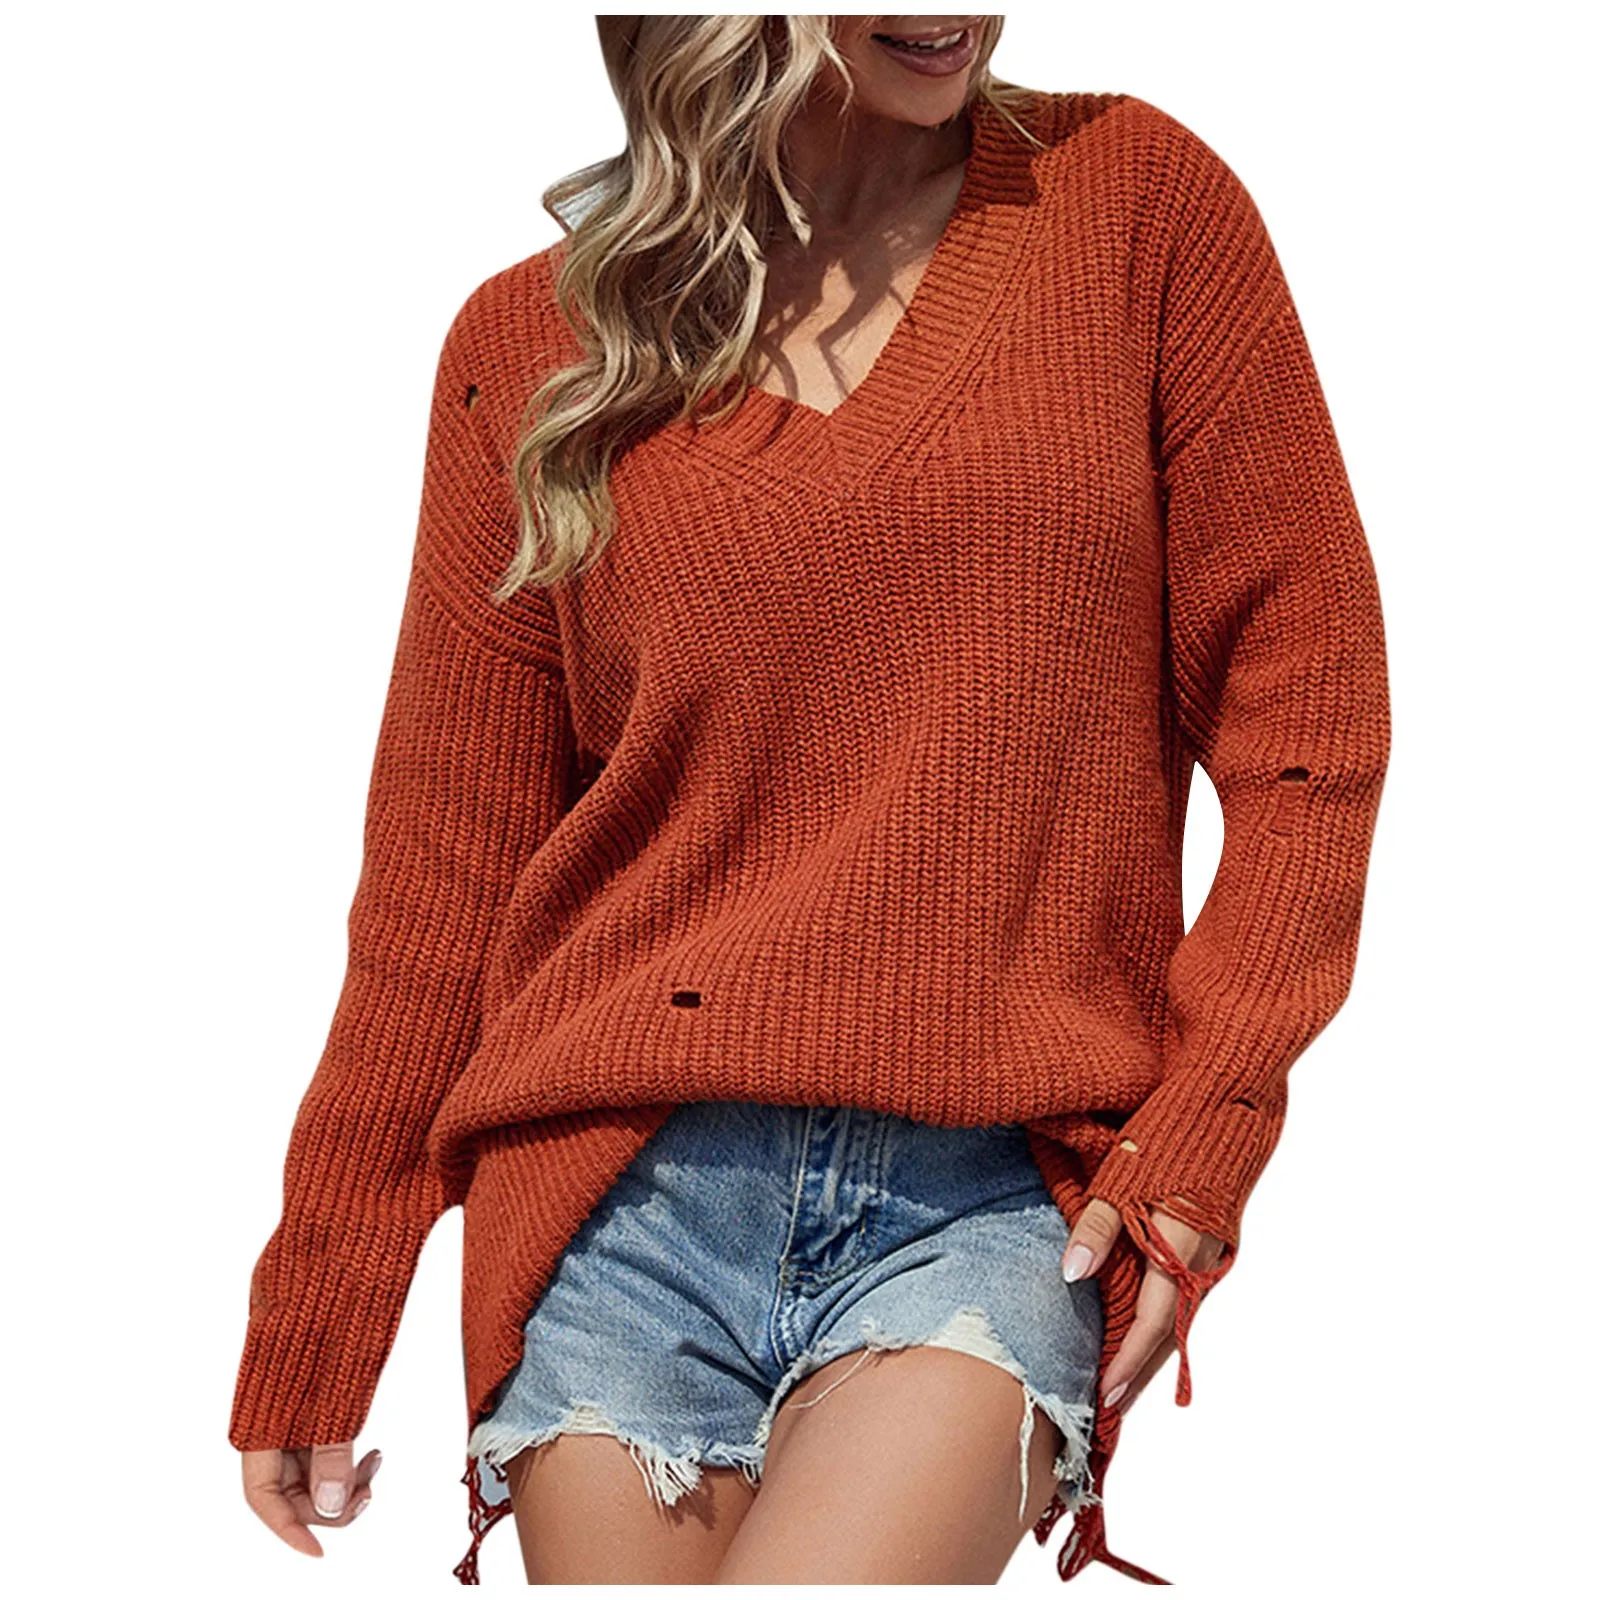 

Women Sweater V-Neck Winter 2023 Autumn Knitwear Long Sleeve Loos Warm Sweater Pullovers Lady Jumpers Knitted Chunky Knit Tops